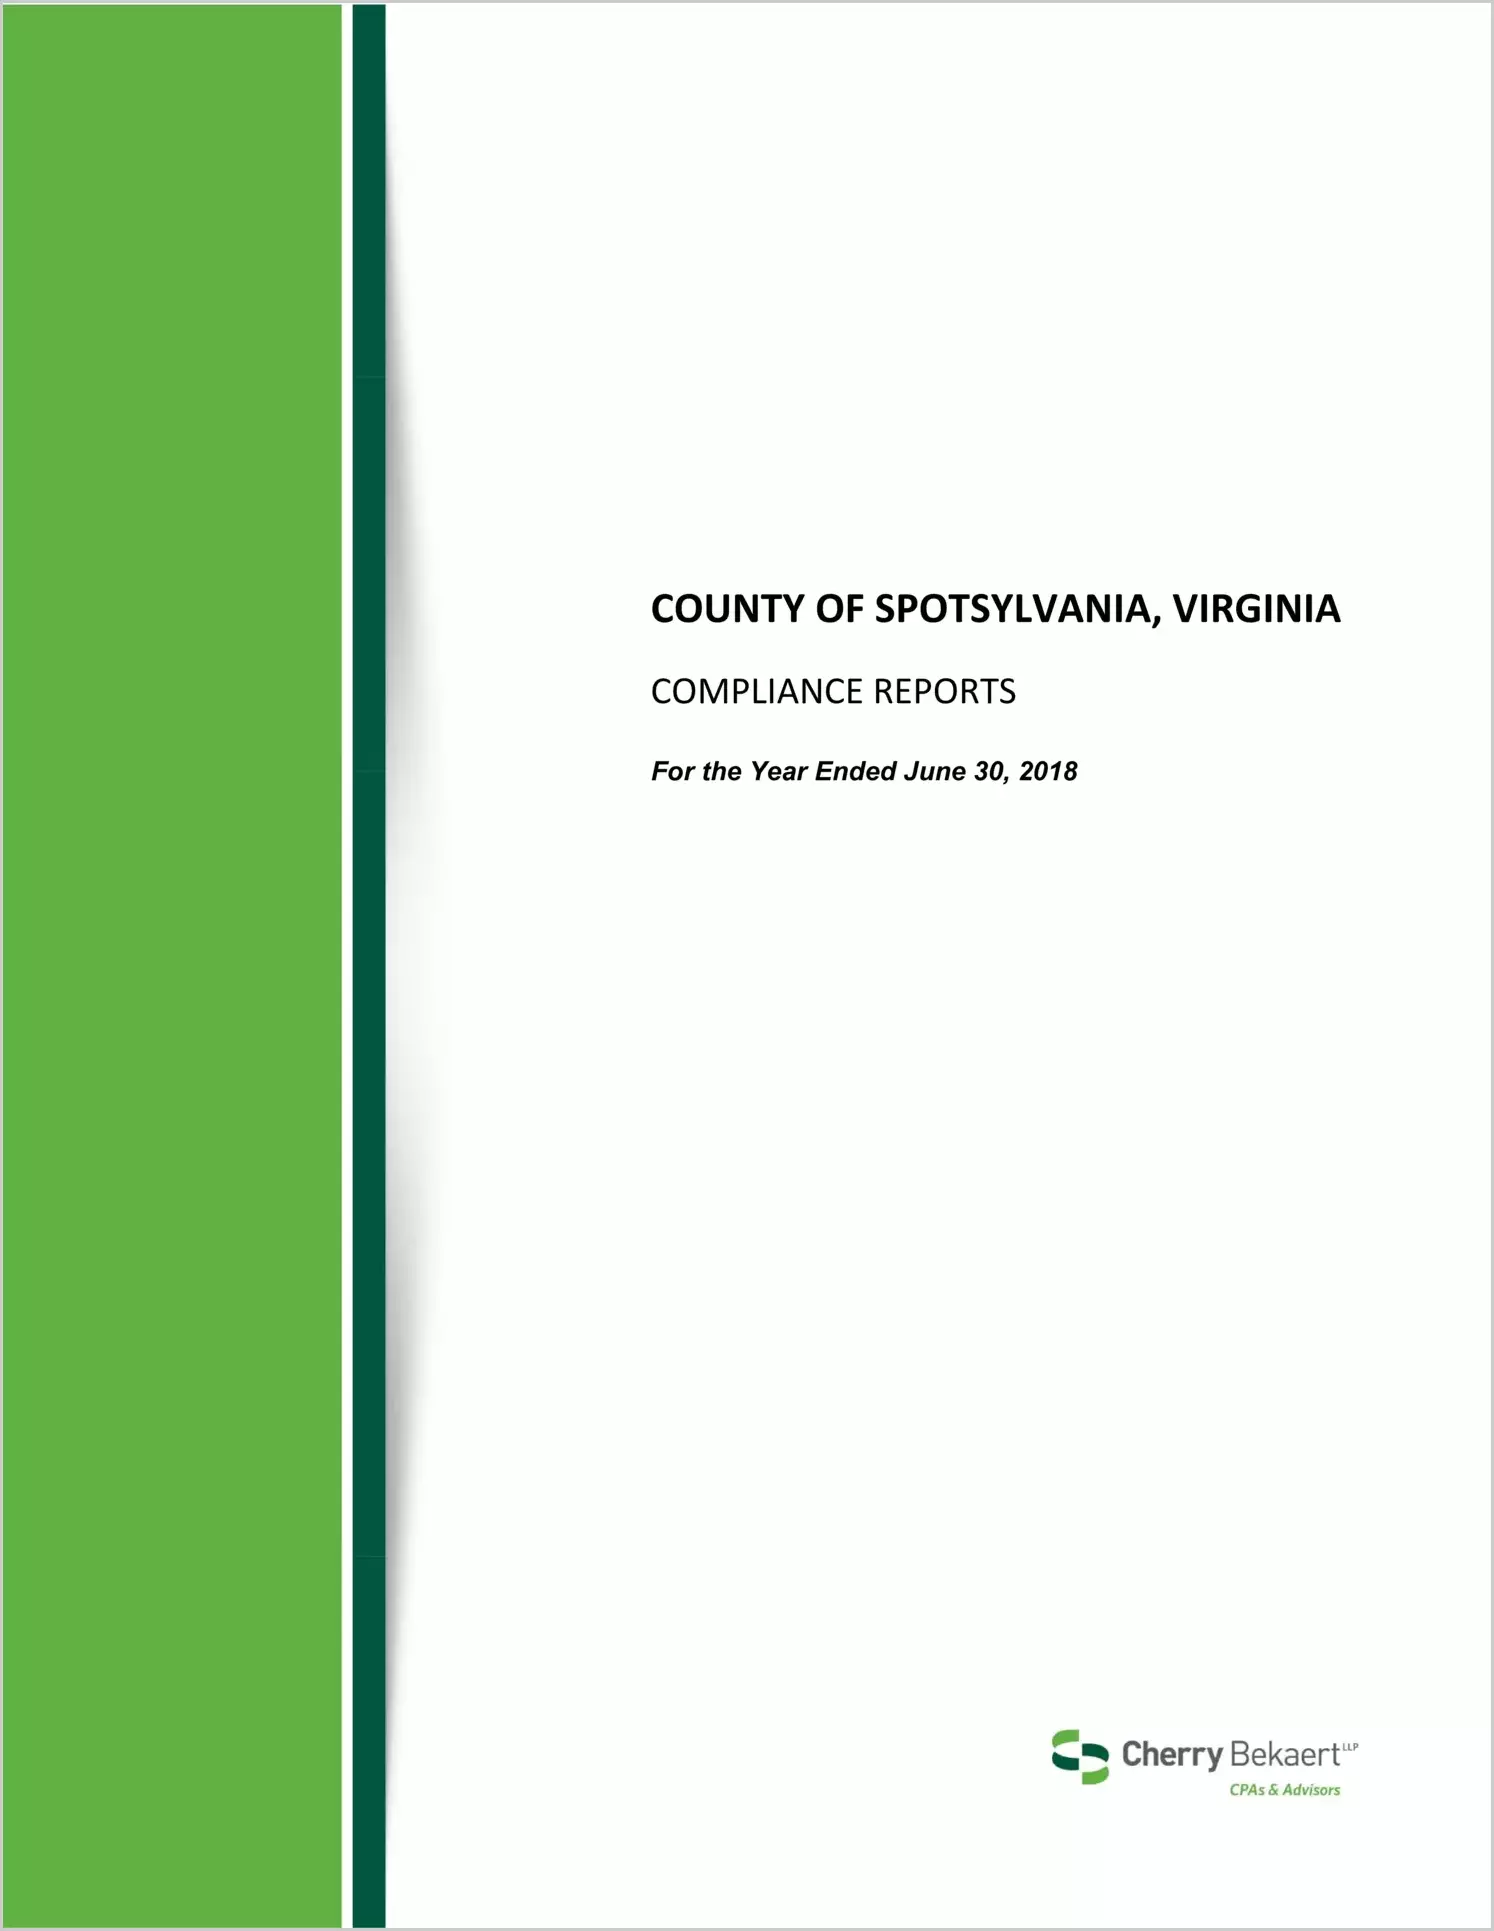 2018 Internal Control and Compliance Report for County of Spotsylvania